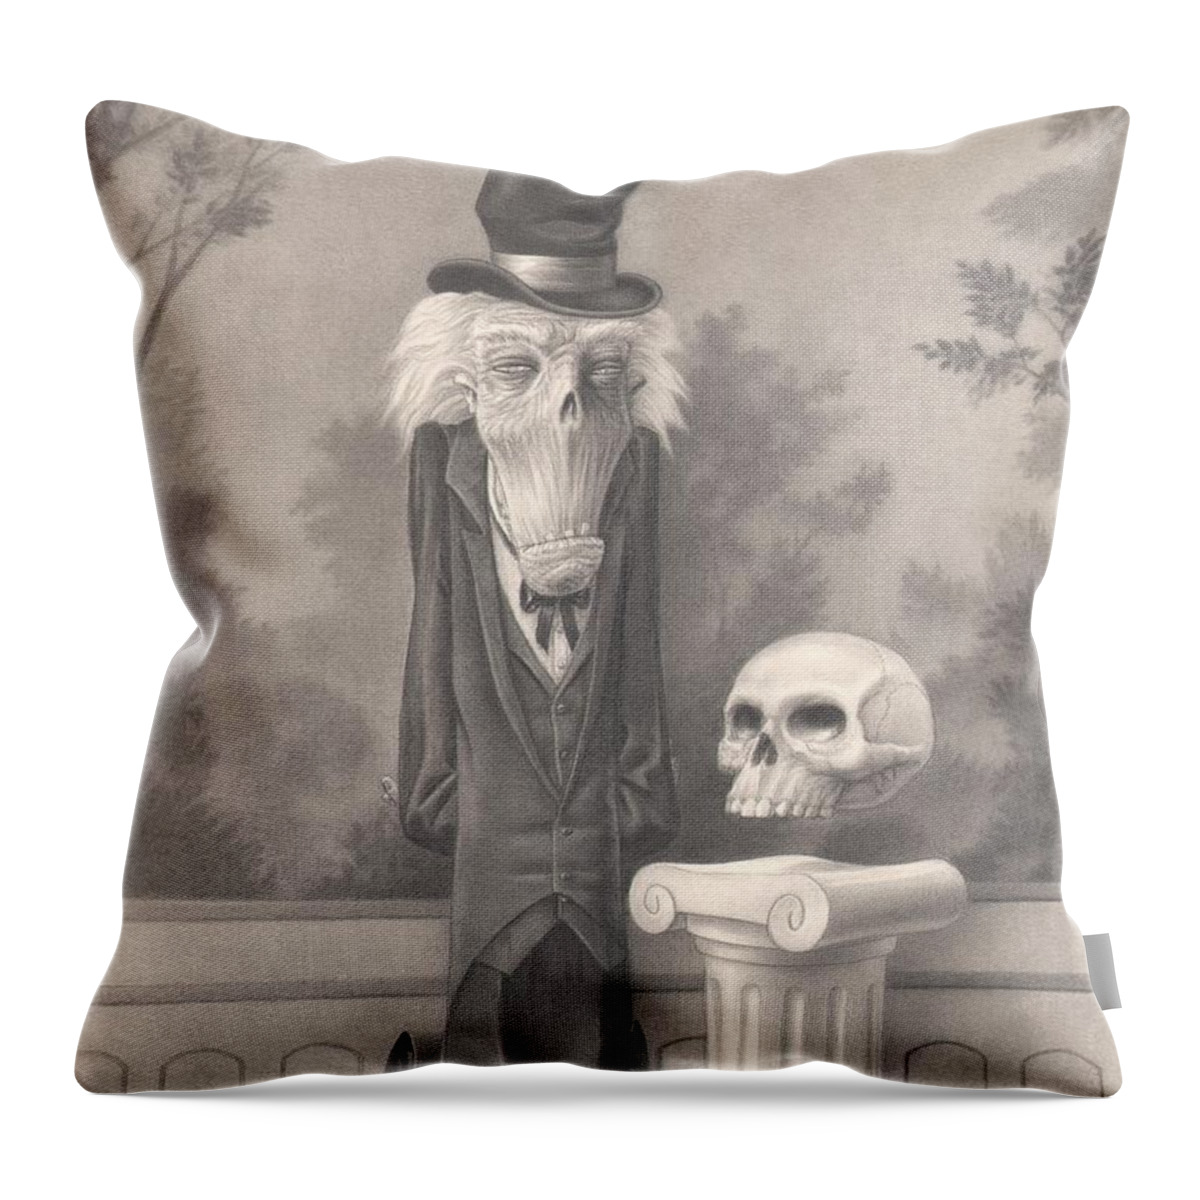 Mr. Skuggins Throw Pillow featuring the drawing Mr. Skuggins by Richard Moore